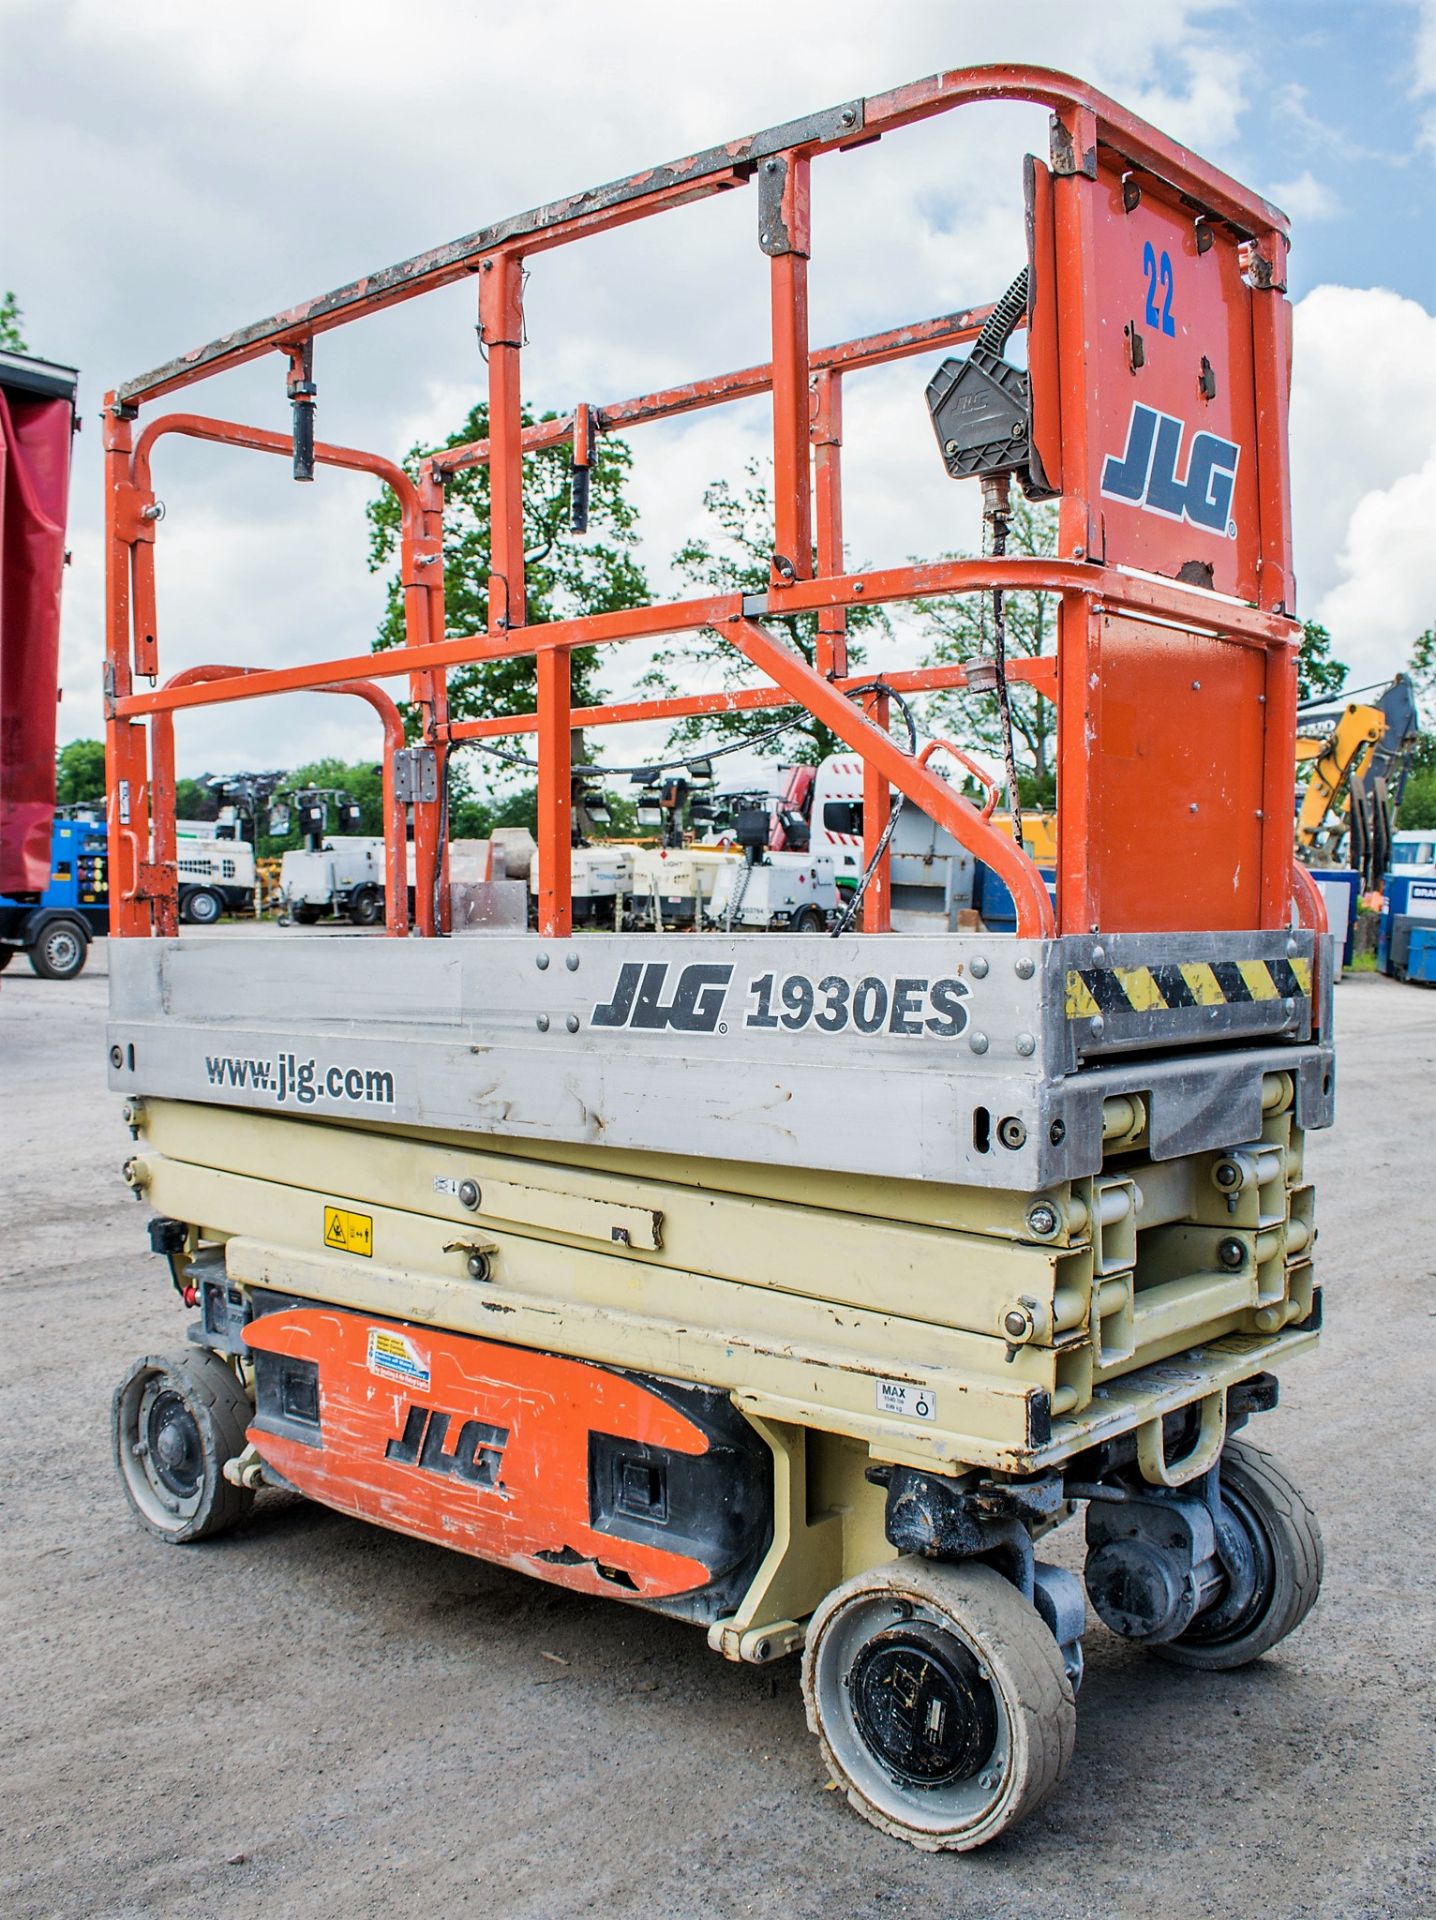 JLG 1930ES 19ft battery electric scissor lift access platform Year: 2004 S/N: 2893 Recorded hours: - Image 4 of 9